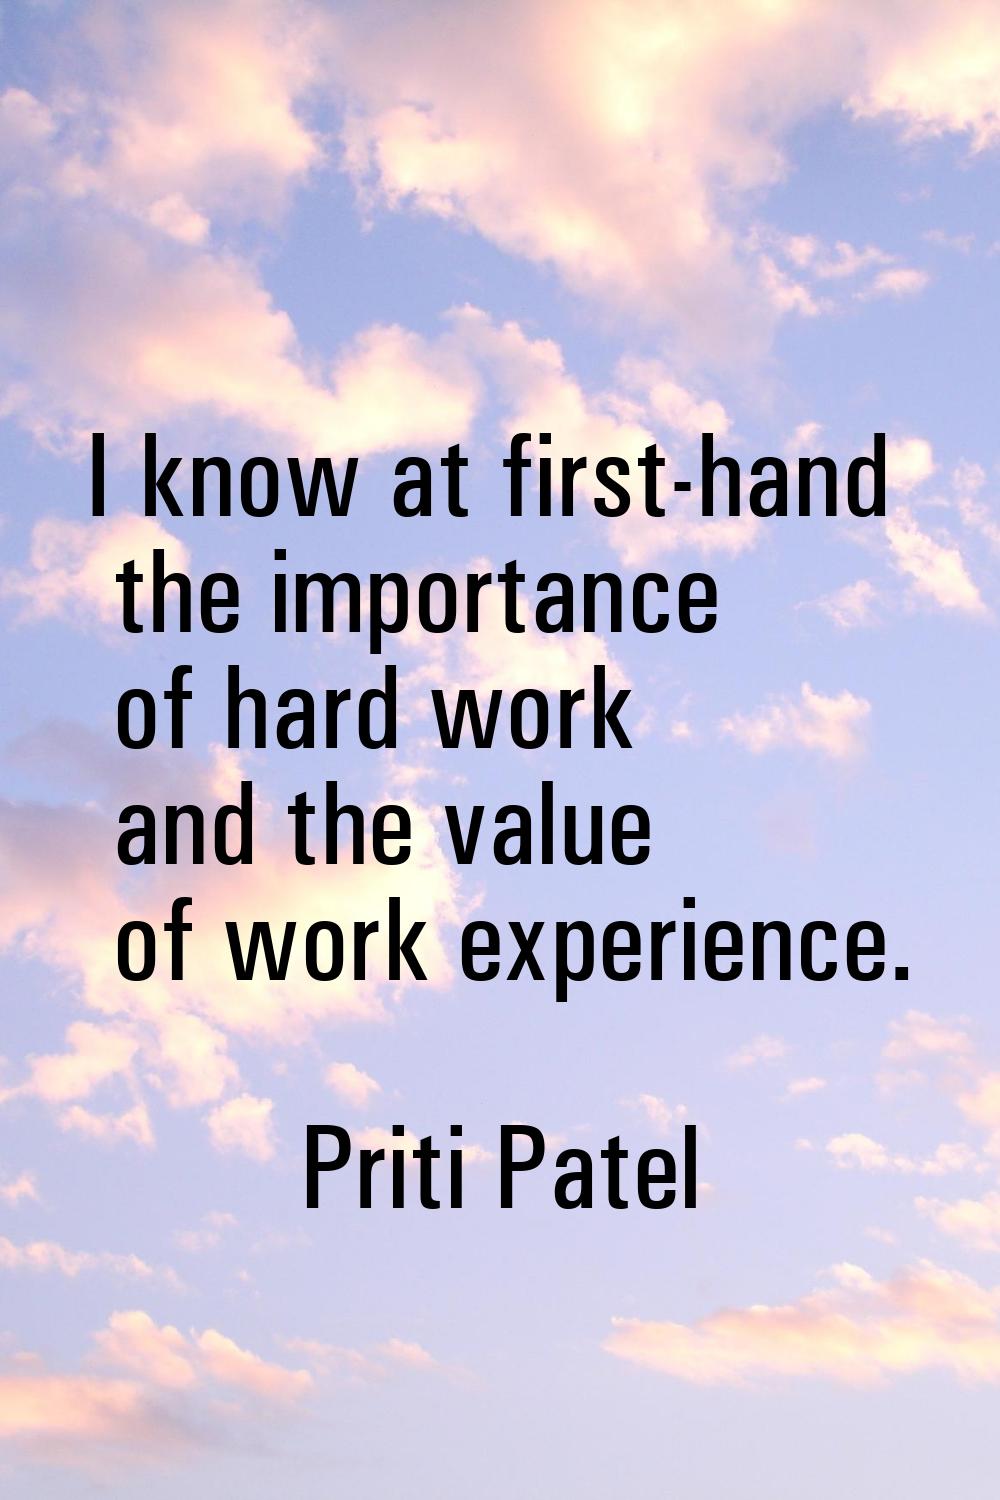 I know at first-hand the importance of hard work and the value of work experience.